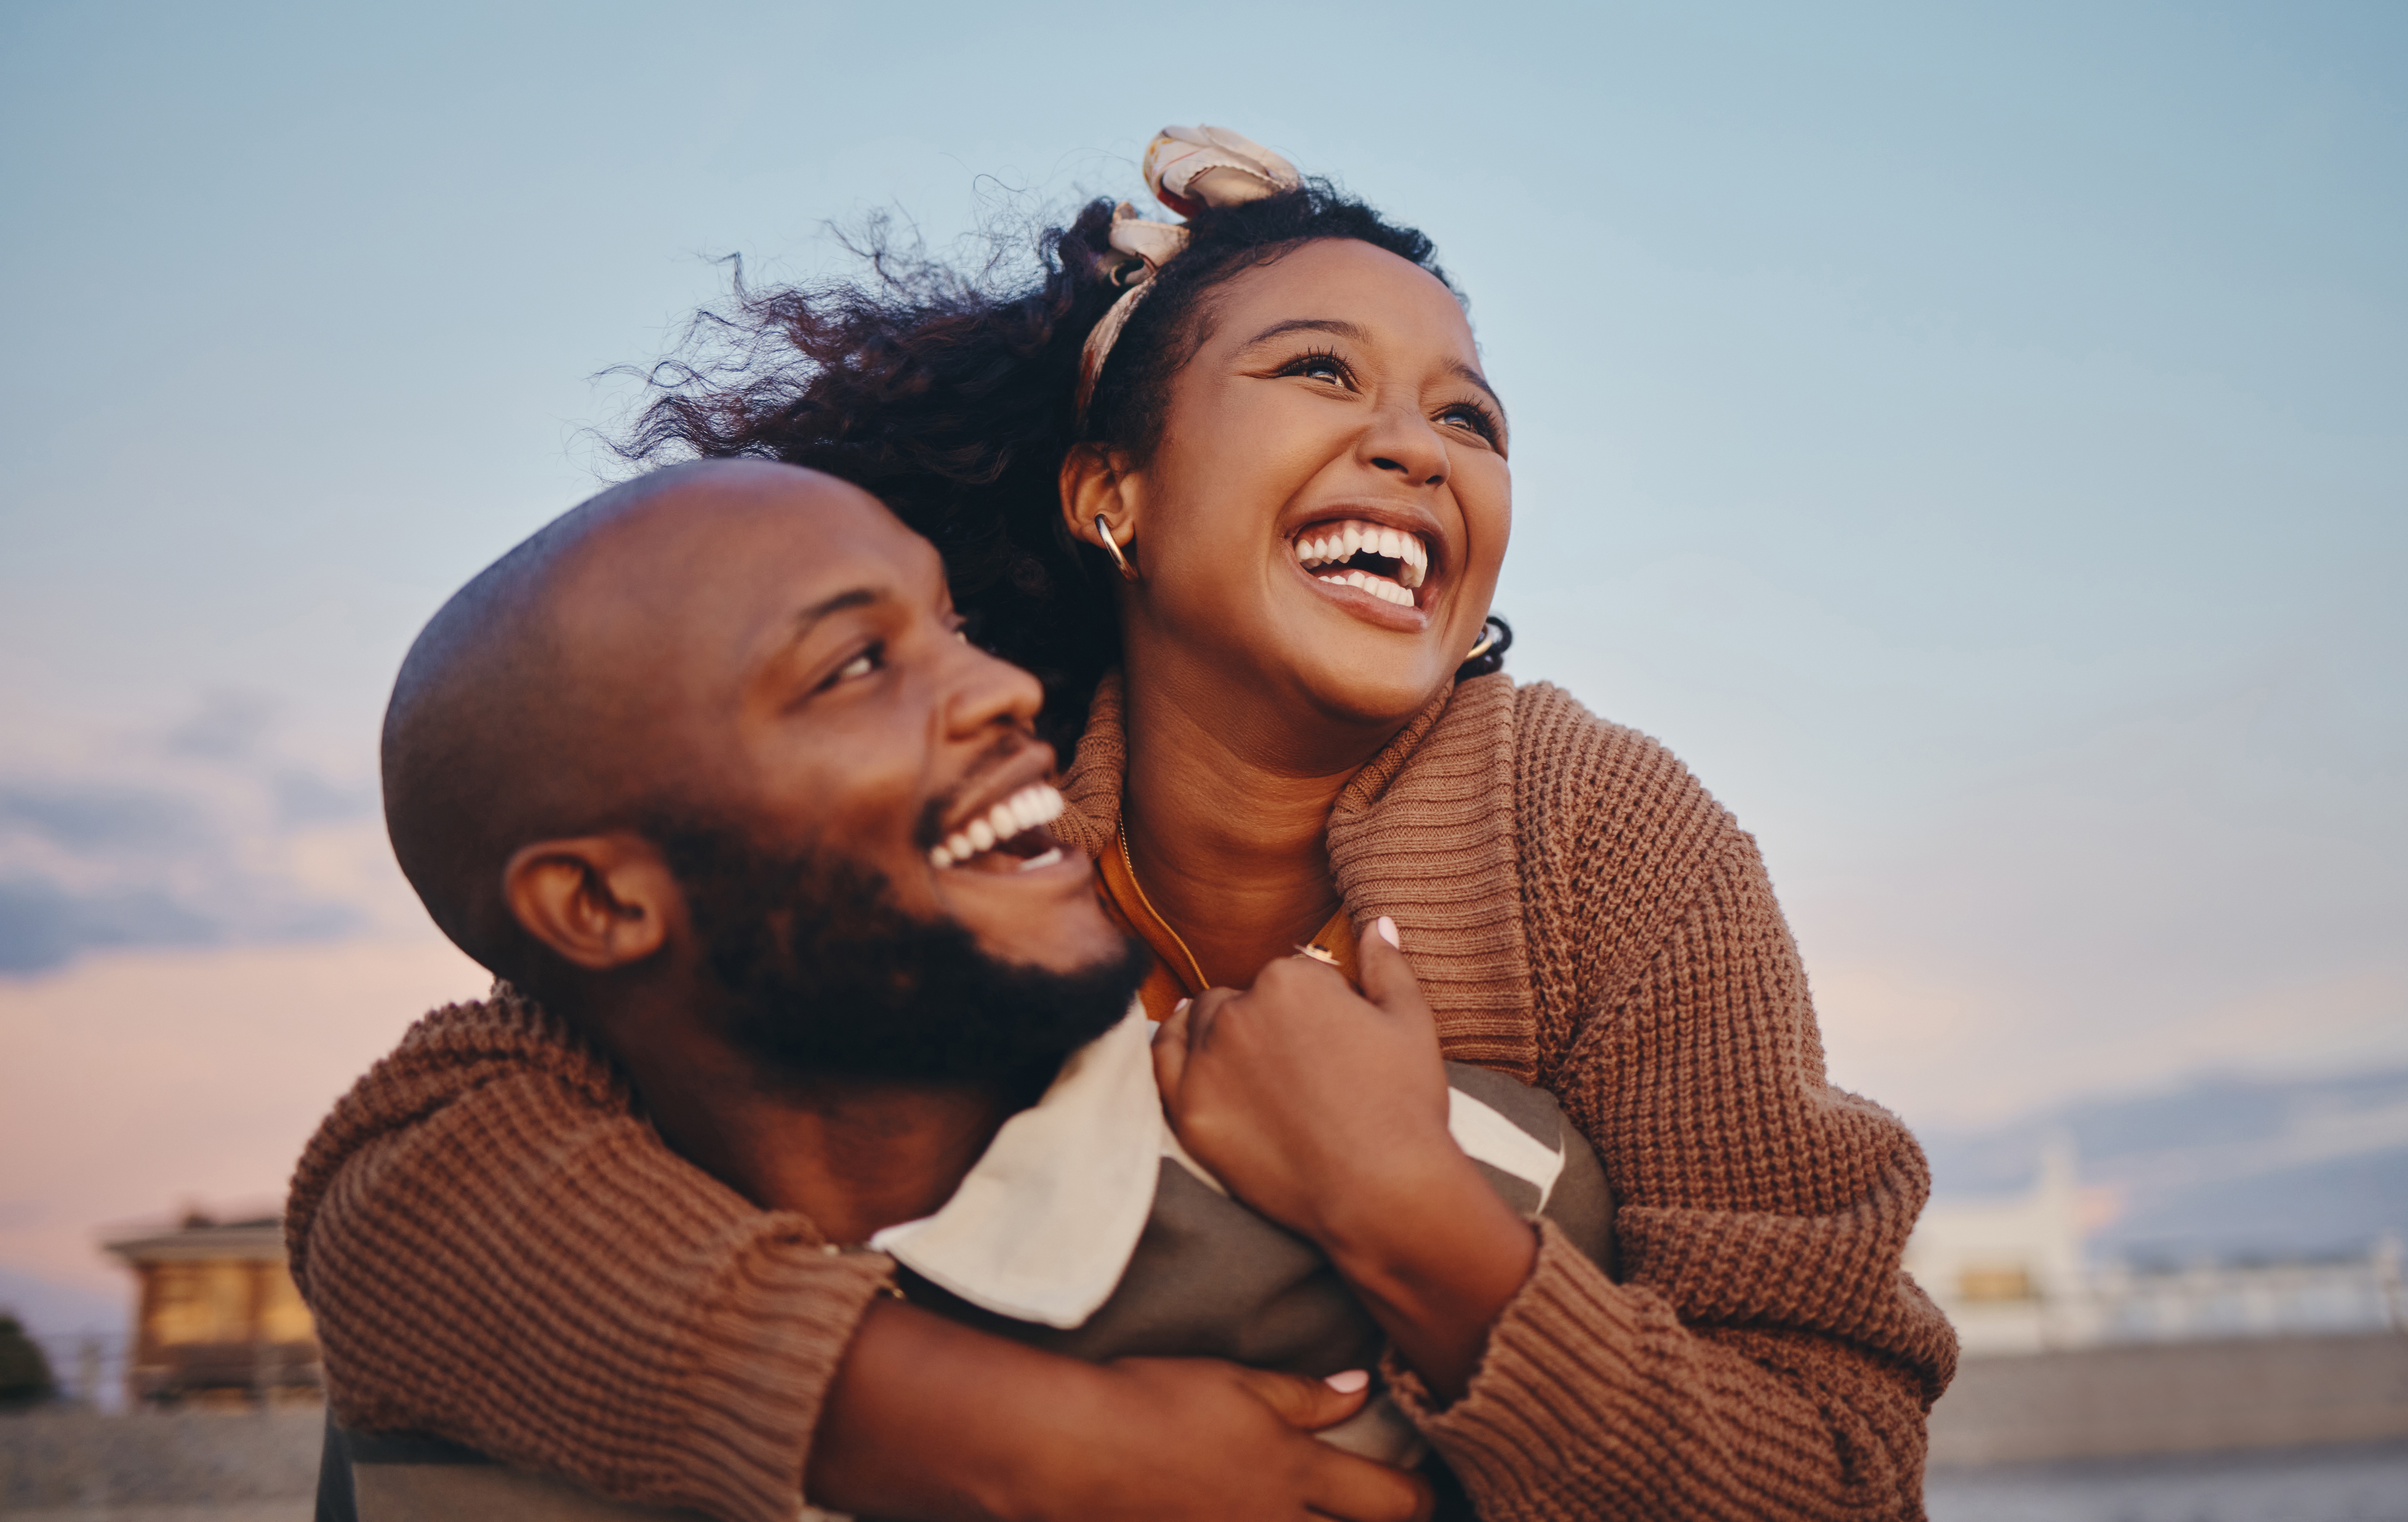 Happy black couple, hug and laugh while enjoying bonding time together in the outdoors. | Source: Shutterstock